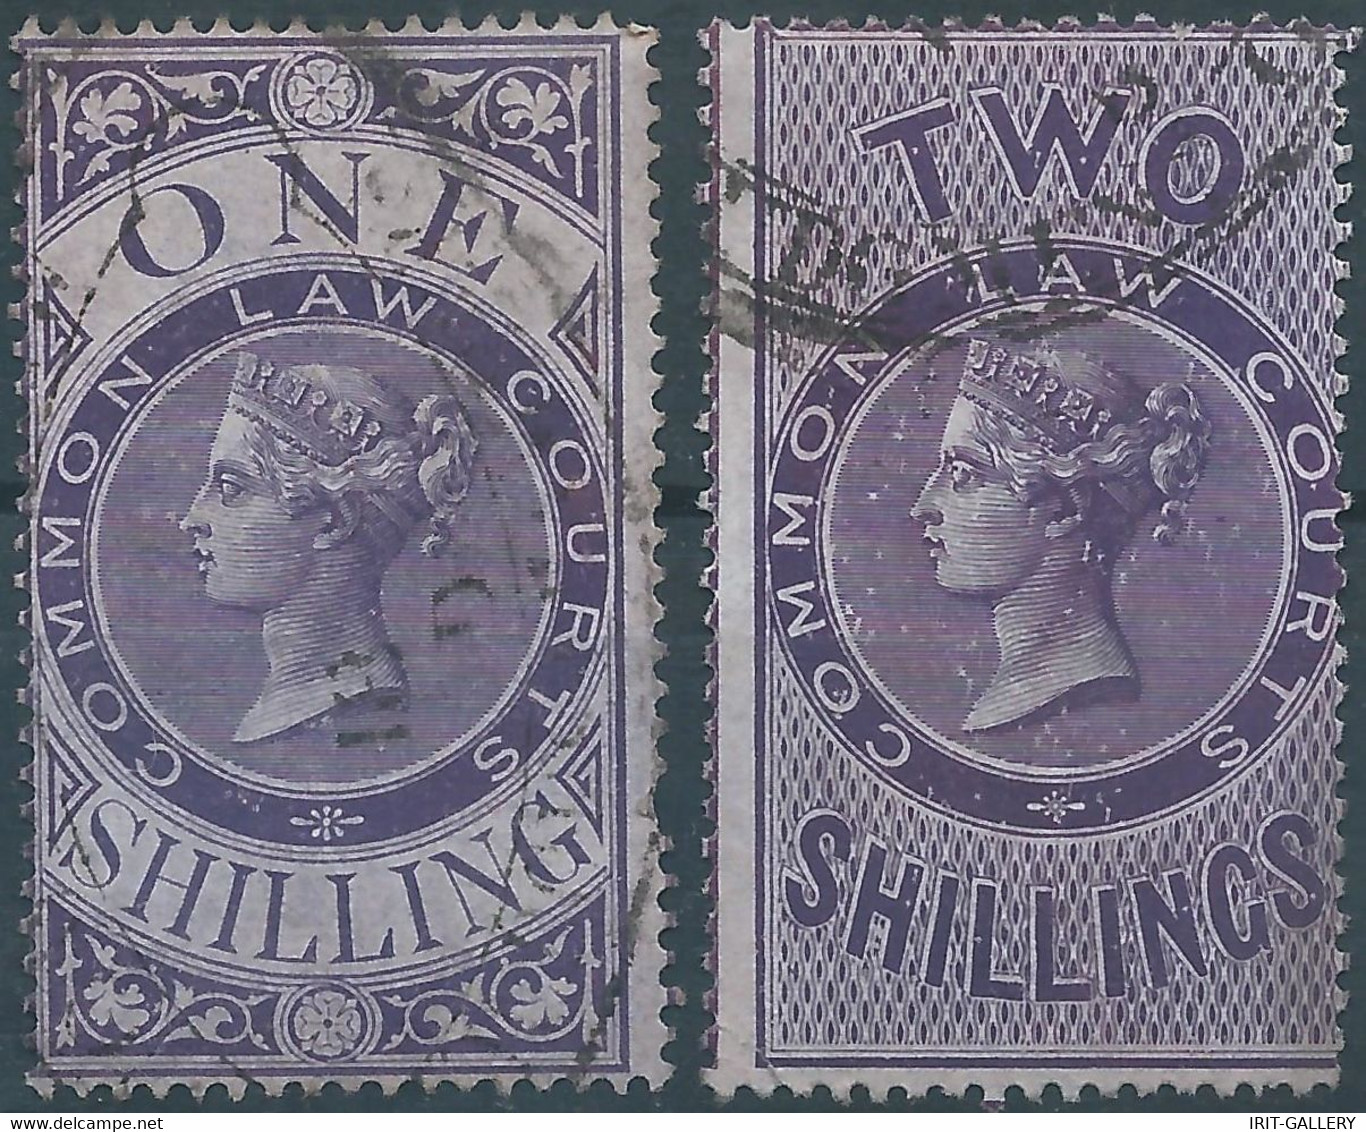 Great Britain-ENGLAND,Queen Victoria,1870/1880 Revenue Stamps Tax Fiscal COMMON LAW COURTS,1 & 2 Shillings,Used - Fiscales